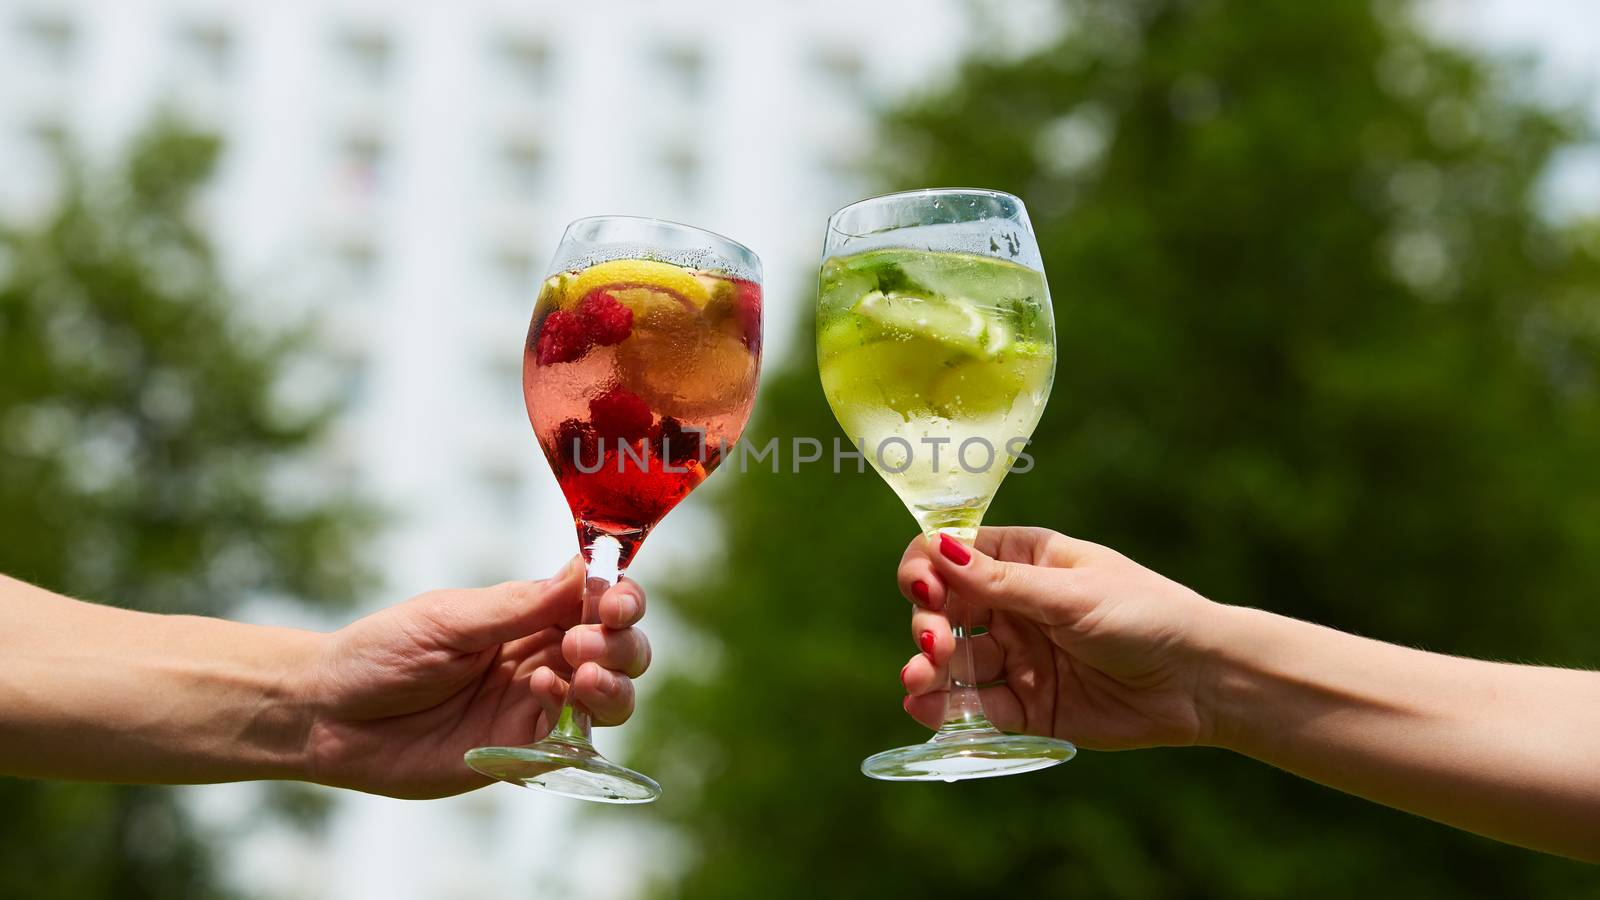 Hand holding glasses of cocktail clinking together at outdoor.